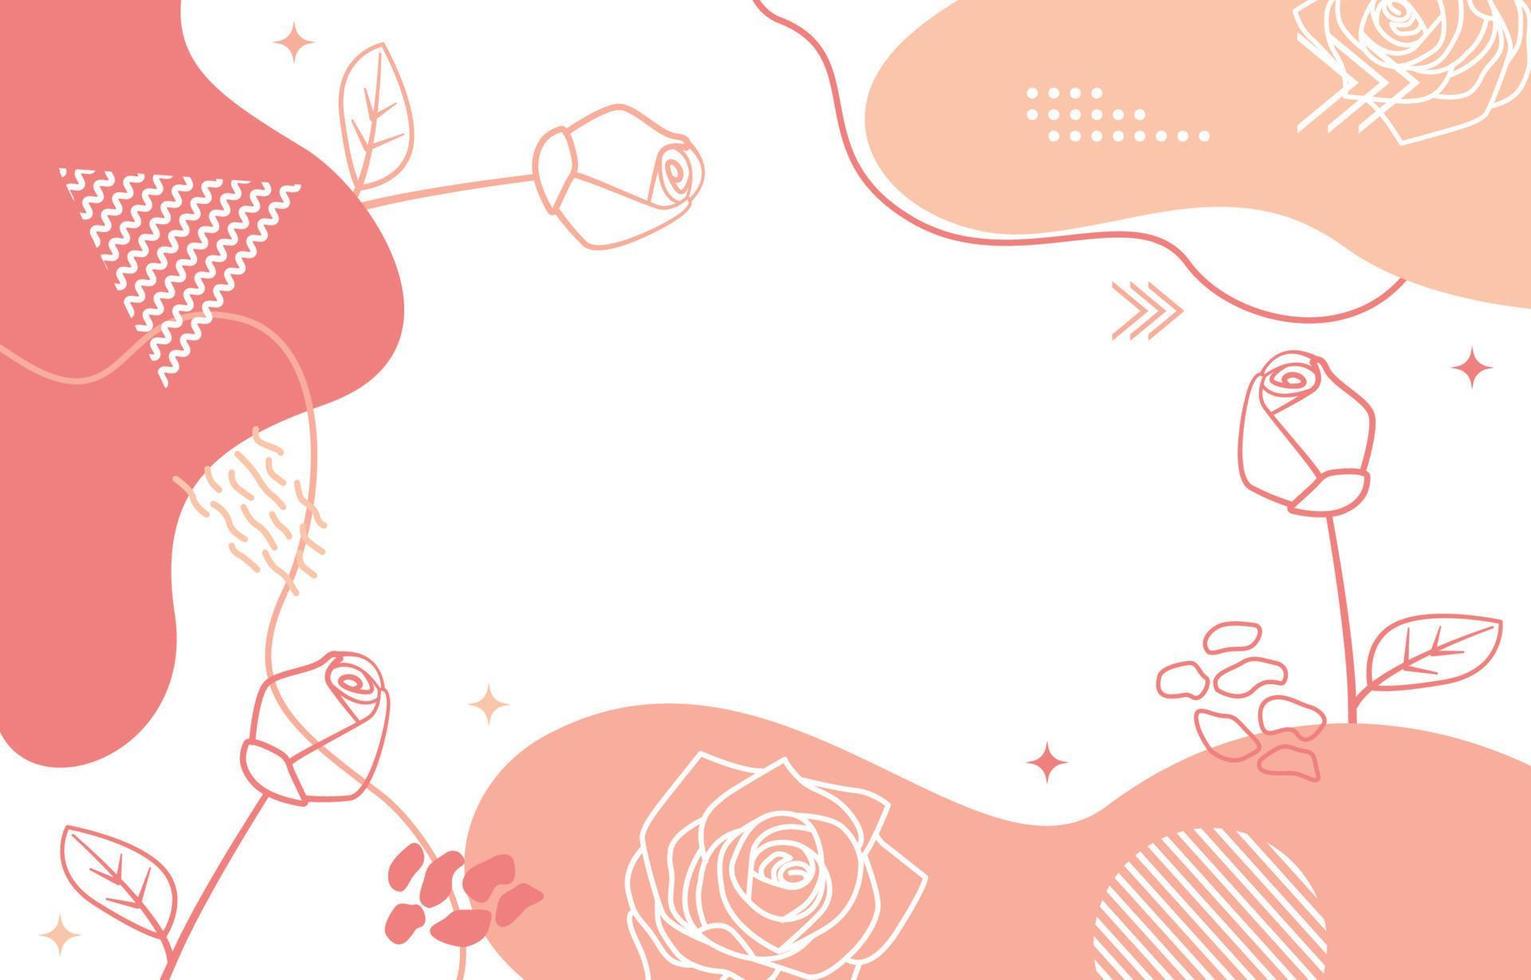 Pink Cute Nature Floral Flower Minimalist Girly Background Wallpaper vector